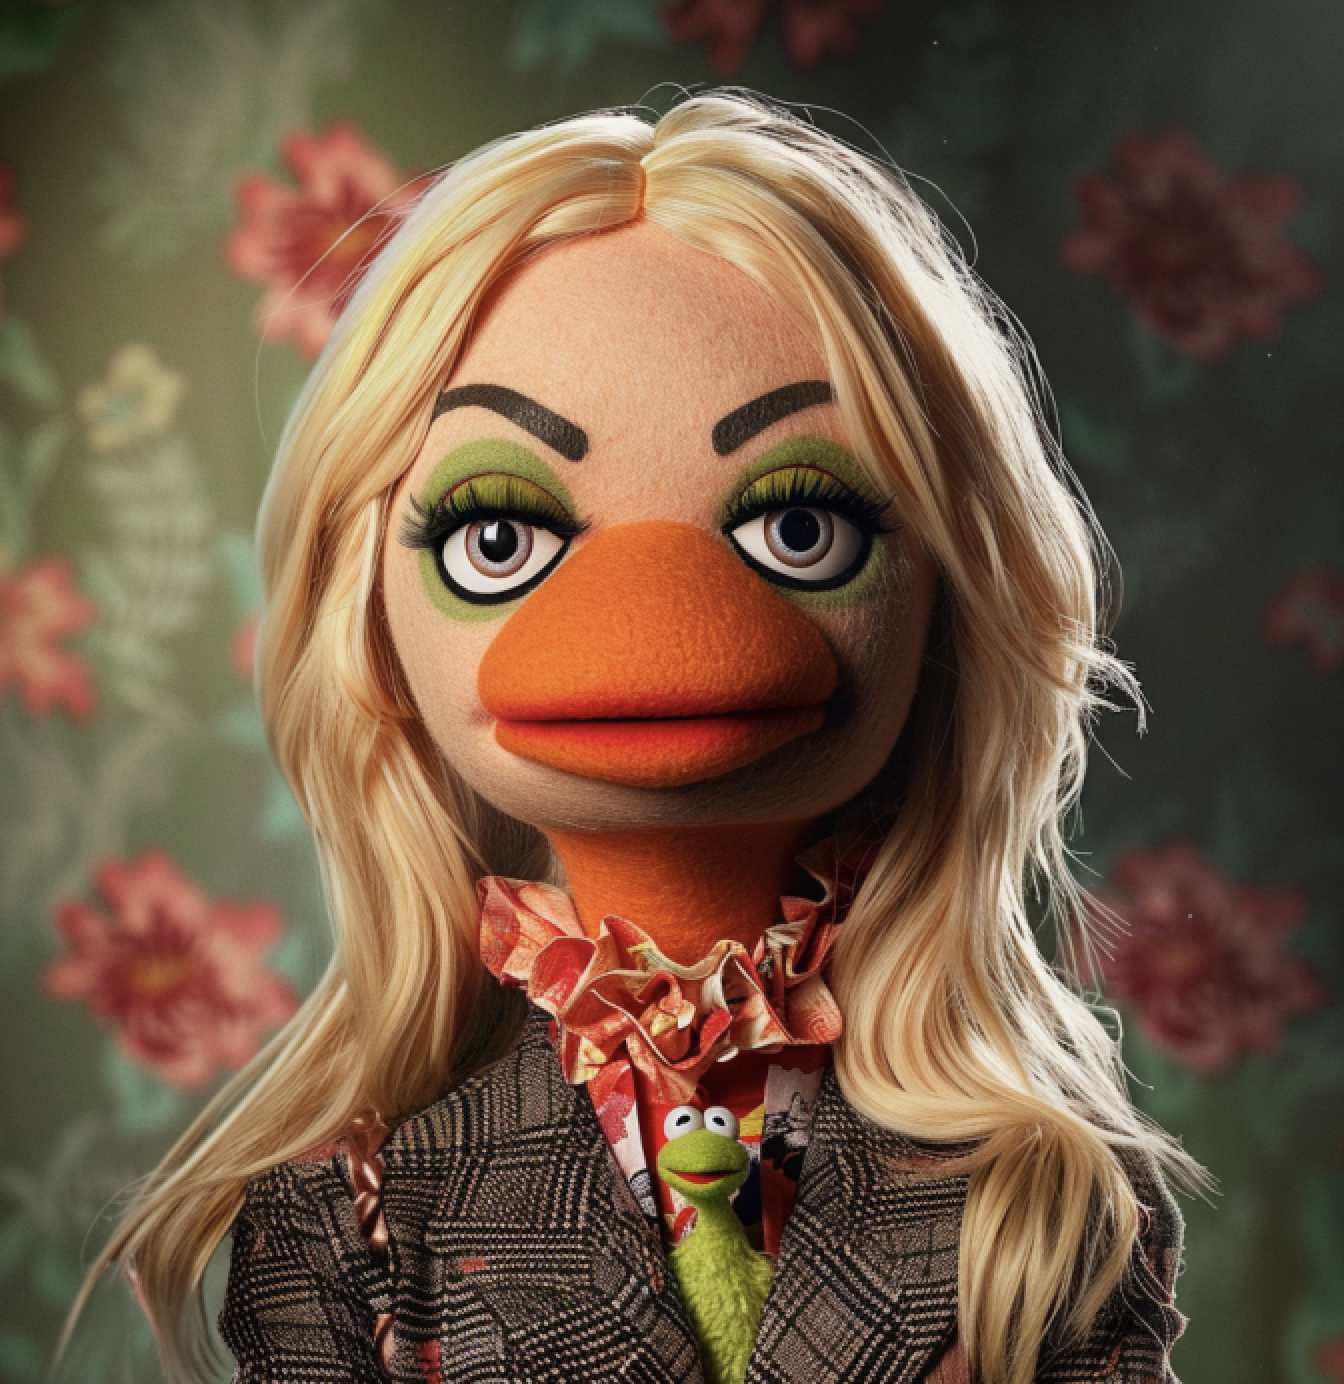 Muppet with long blonde hair and beak-type nose/mouth, wearing ruffled shirt and jacket, with small Kermit toy